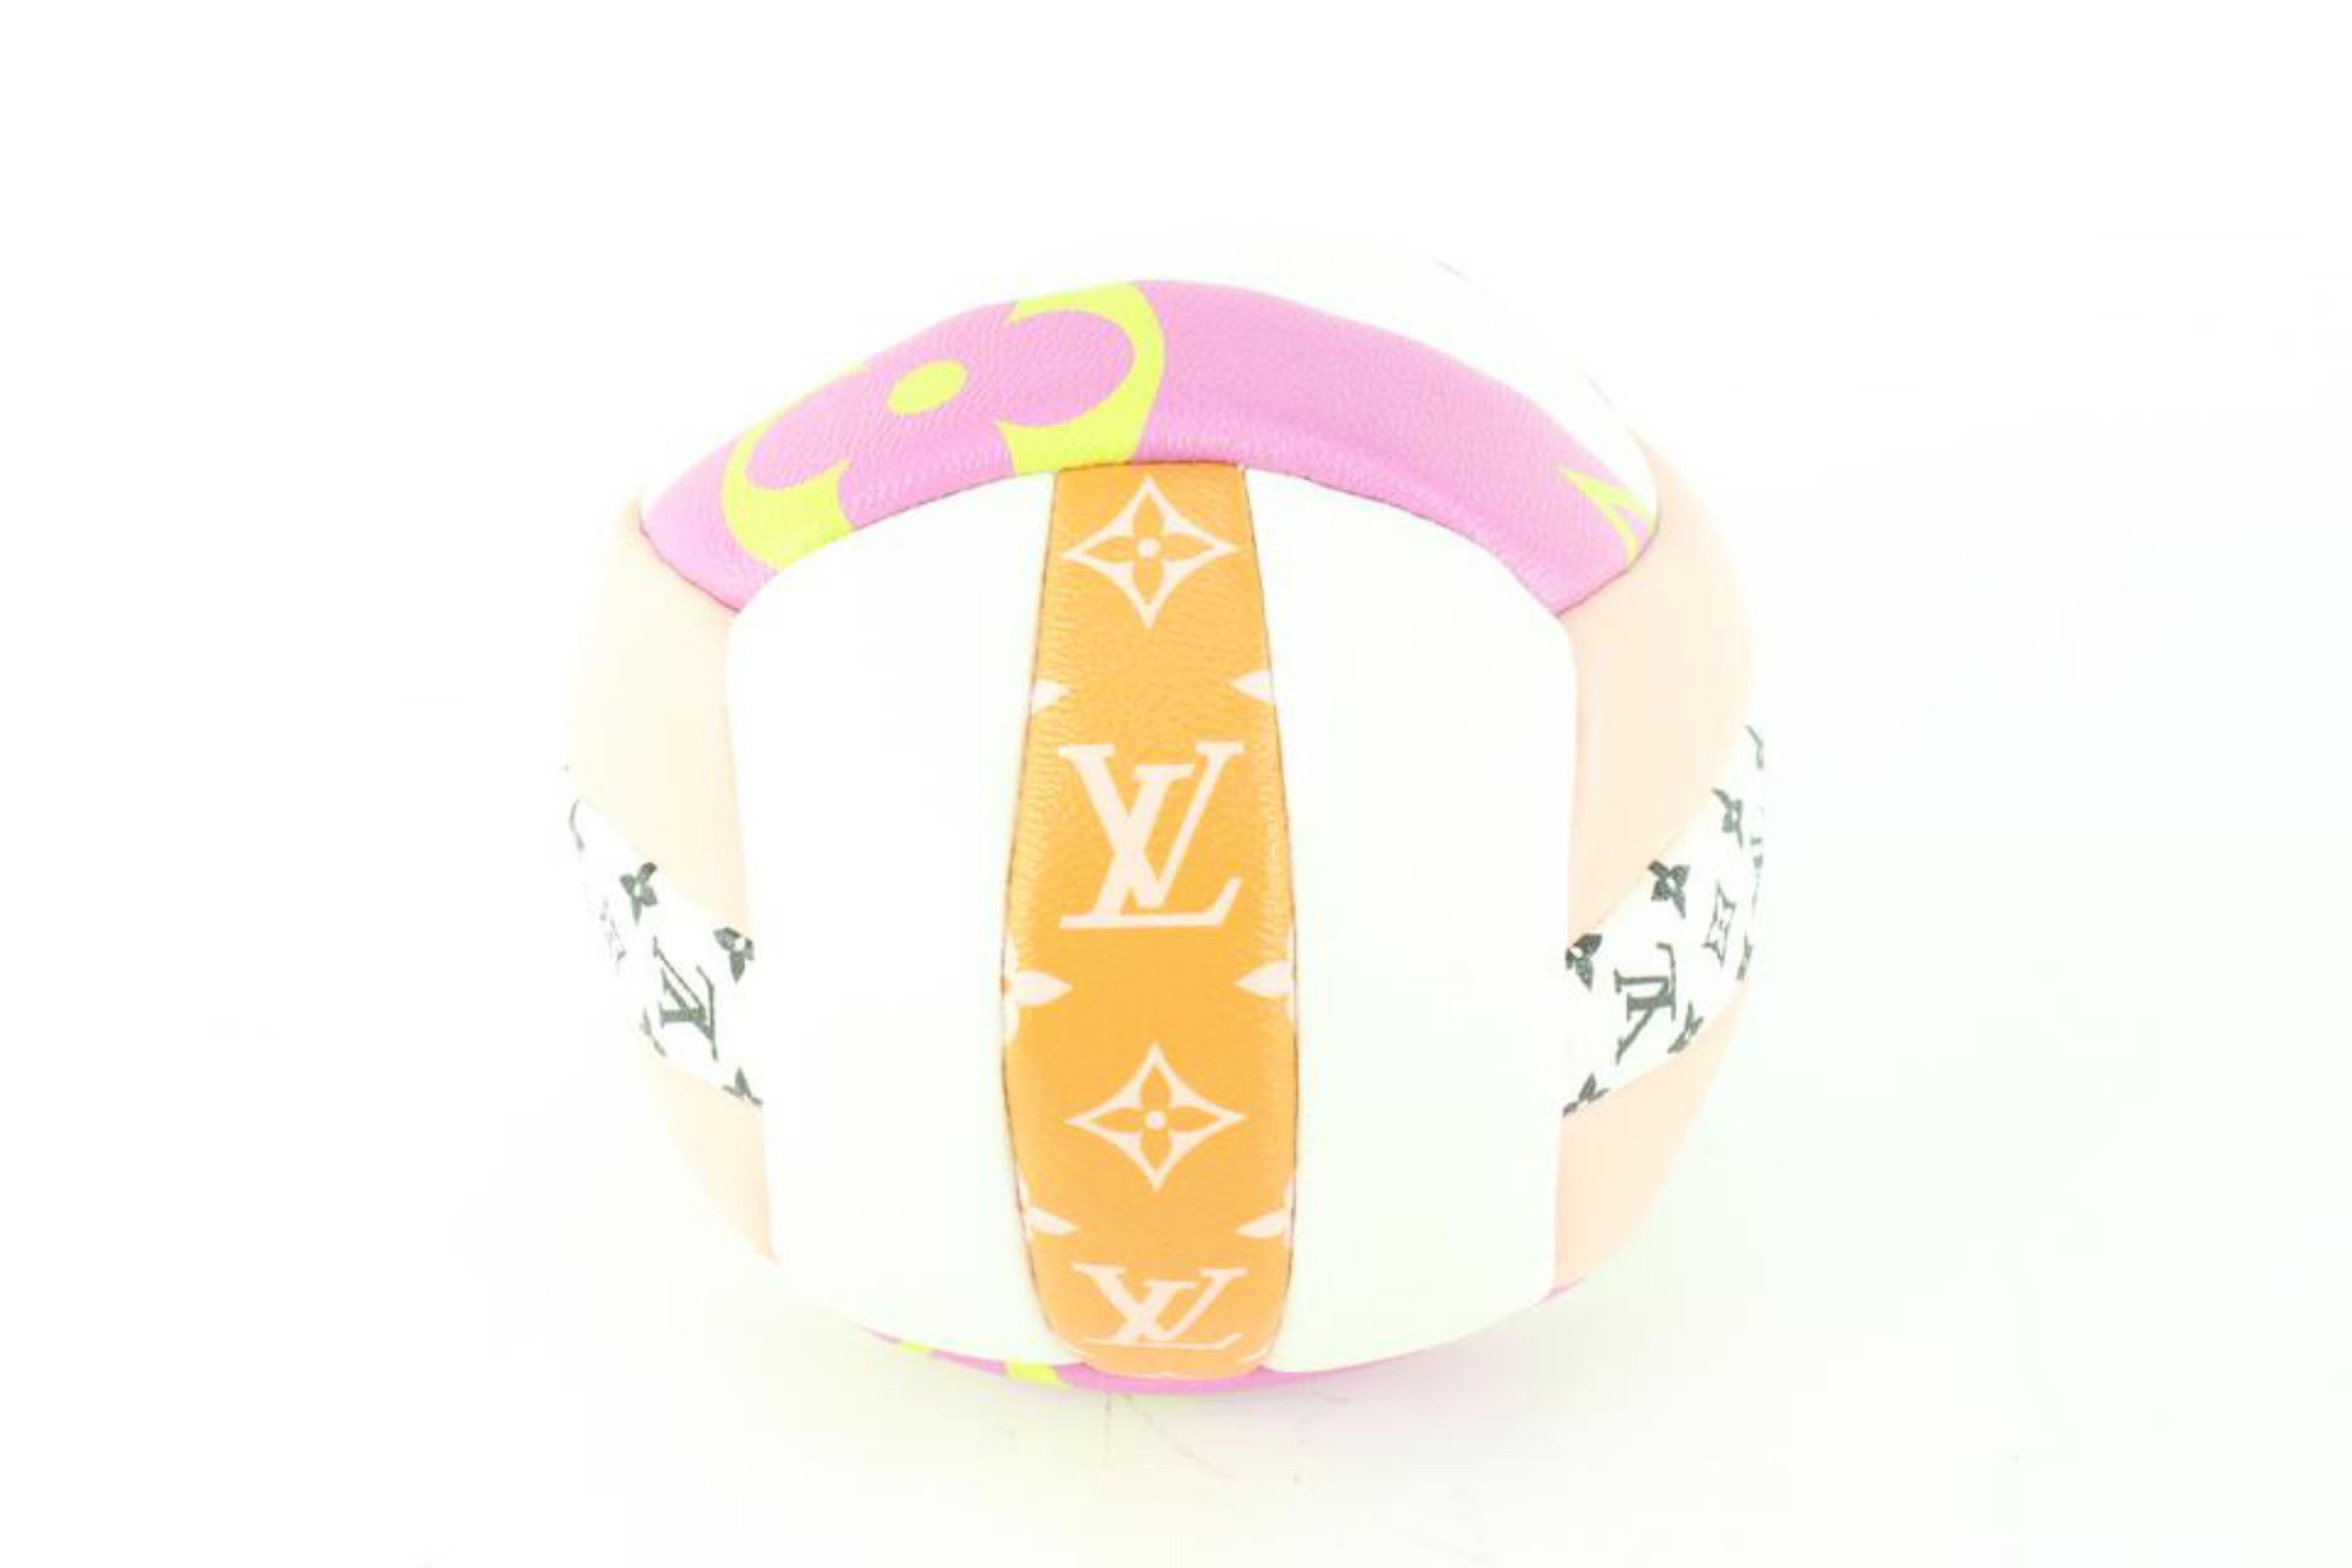 Louis Vuitton SS20 Limited Pink x Orange Monogram Giant Volleyball 39lk62s For Sale 1